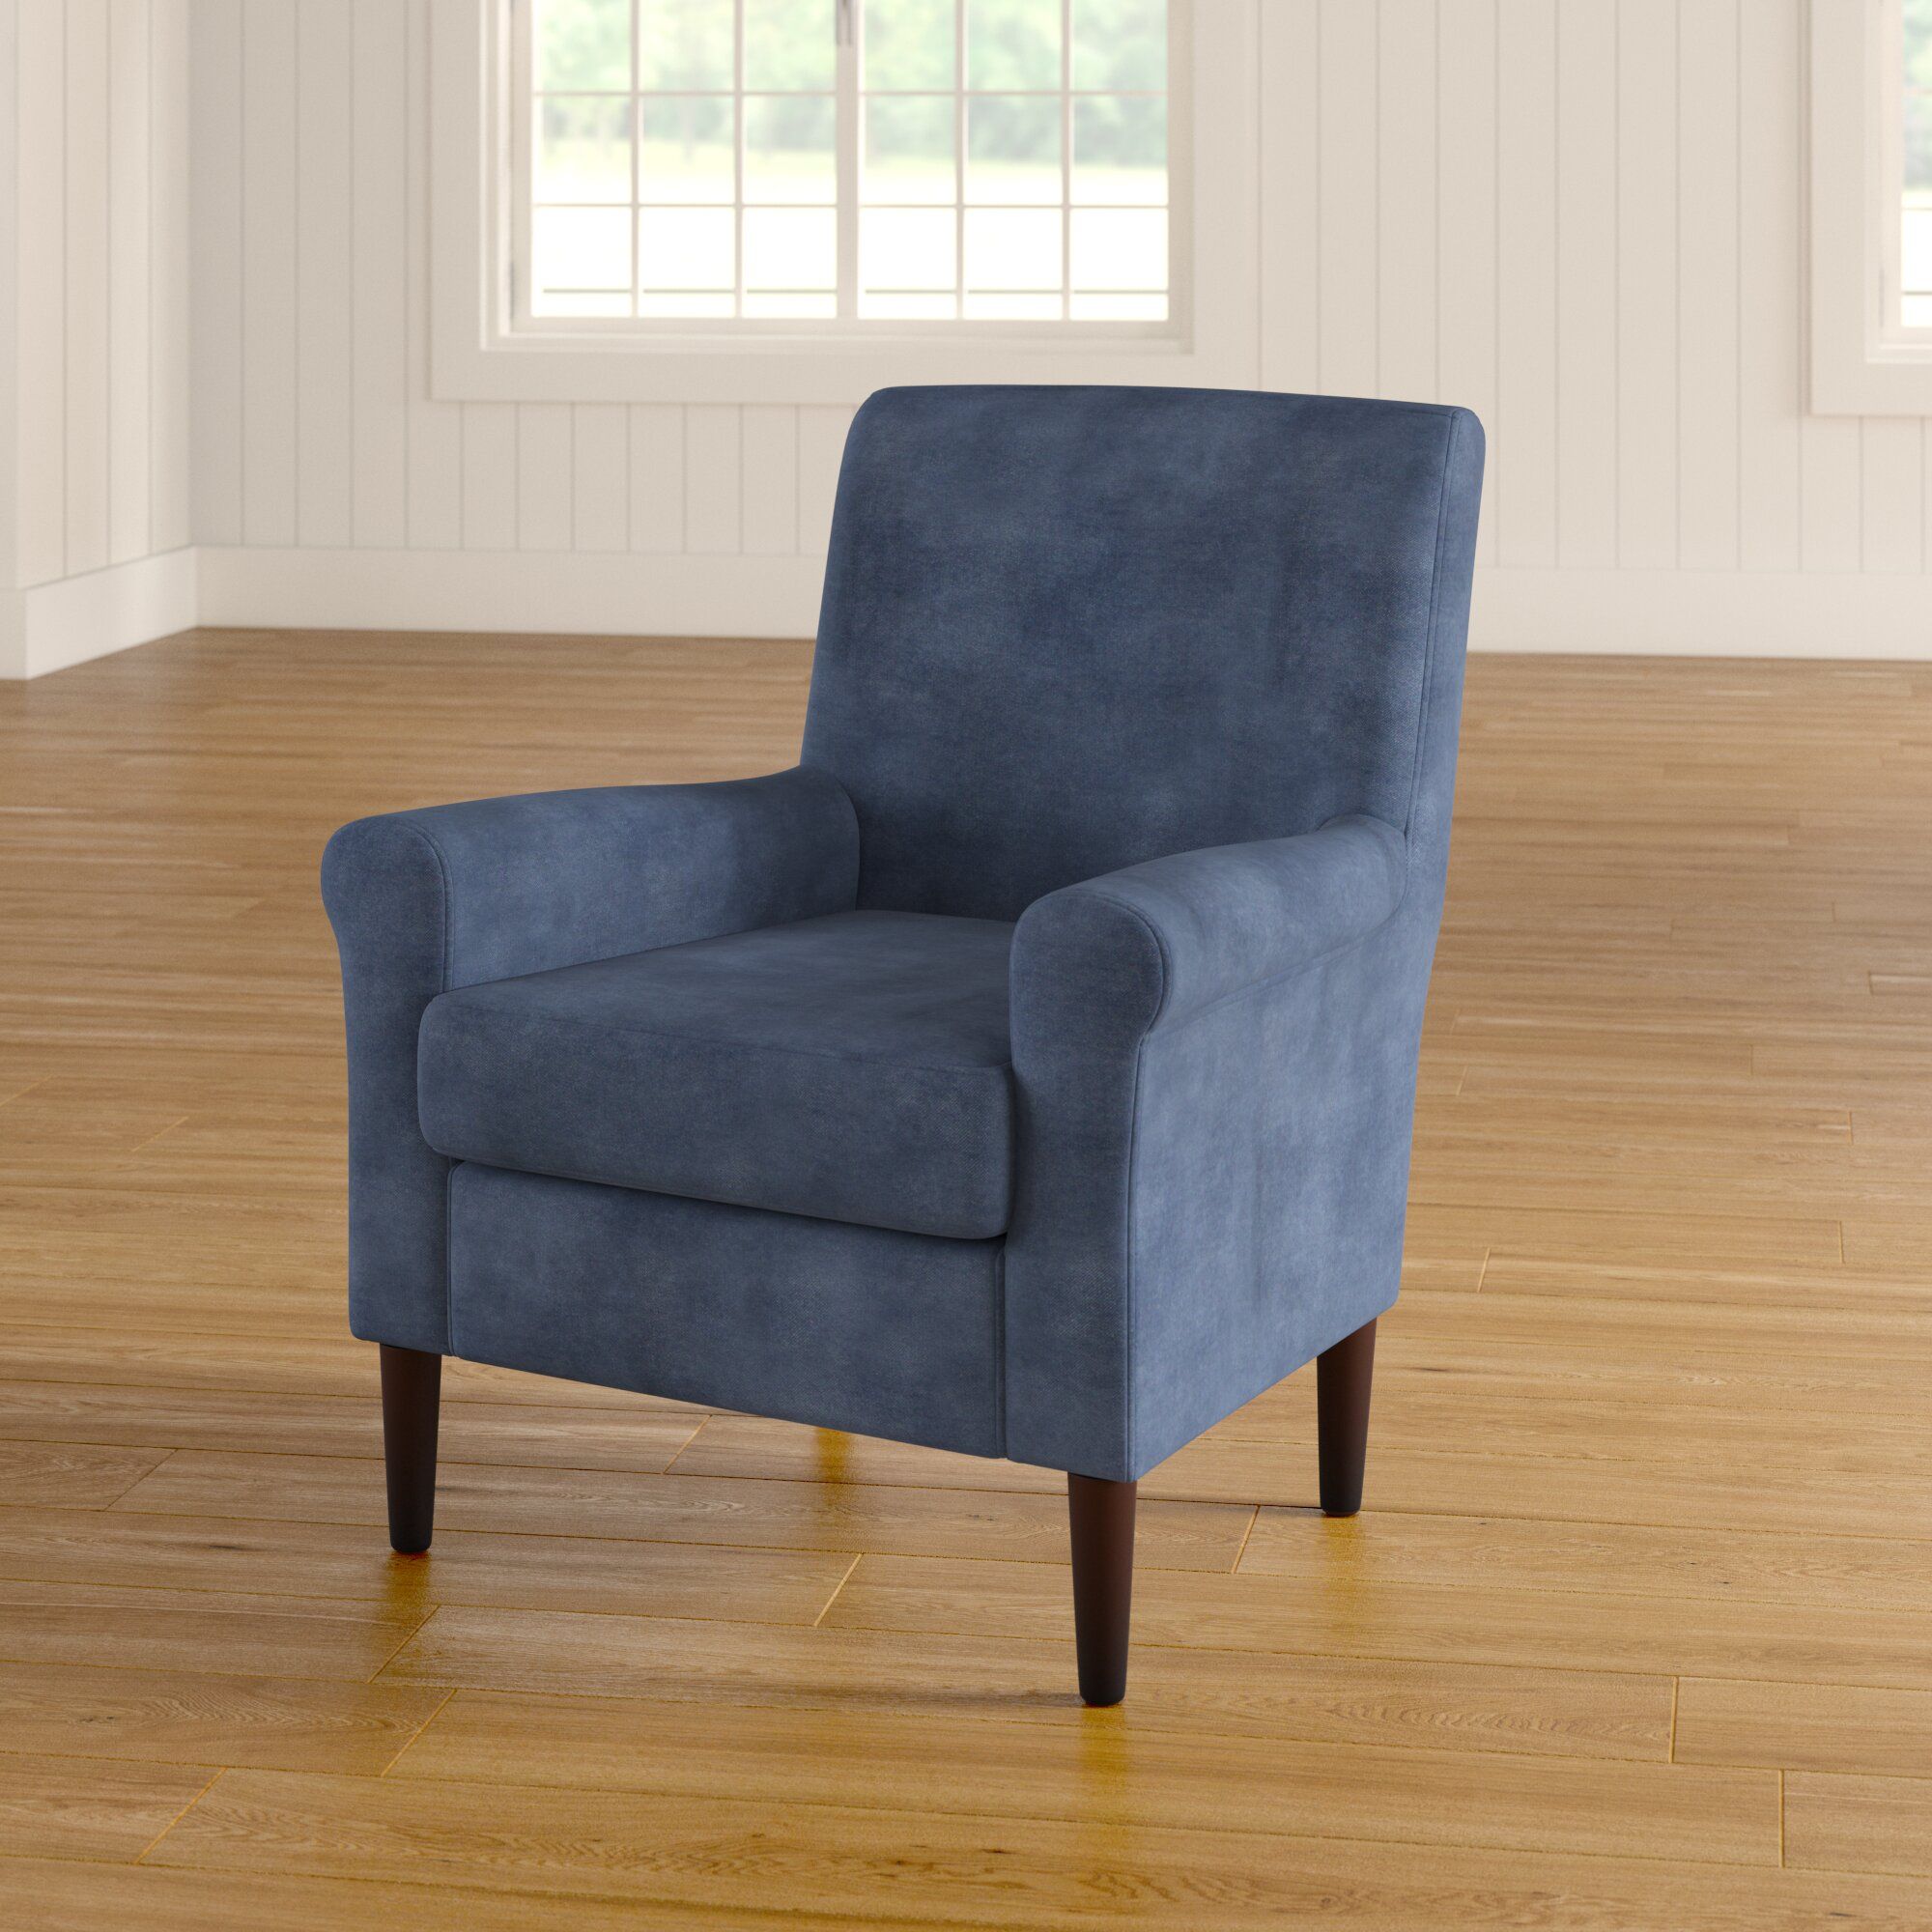 Ronald 28" W Polyester Blend Armchair Within Ronald Polyester Blend Armchairs (View 2 of 15)